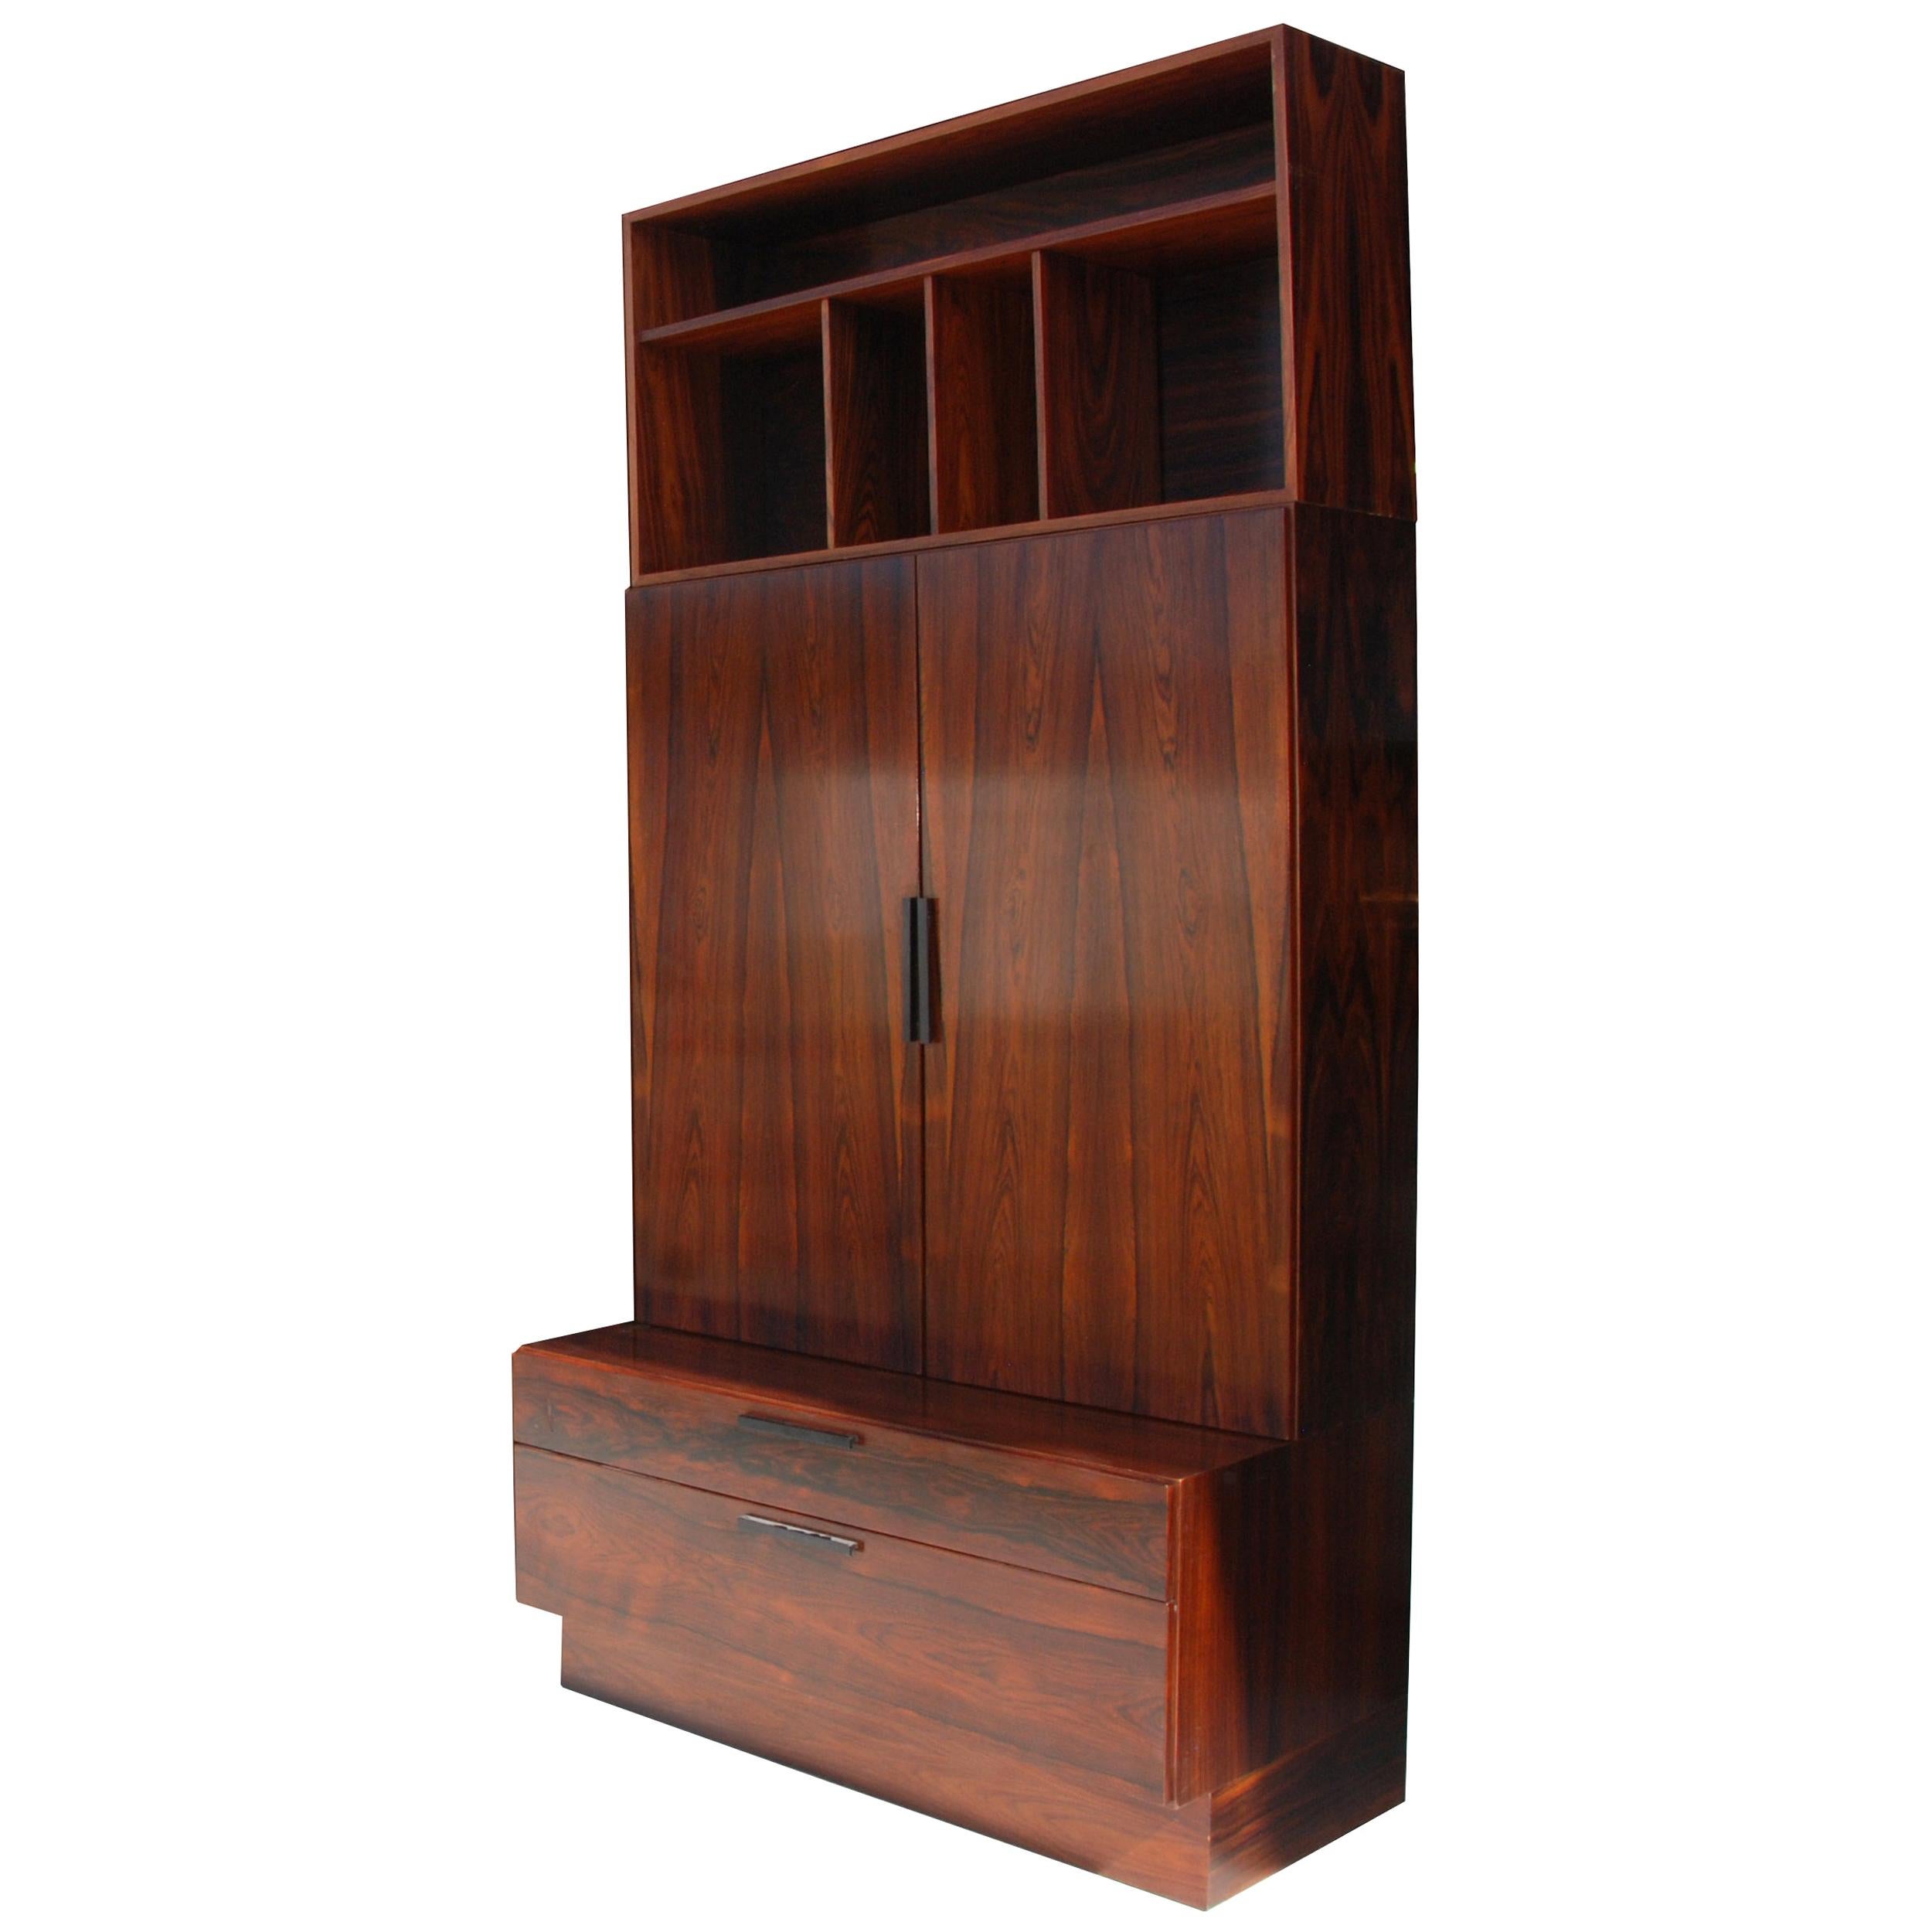 1 45" Rosewood Bookcase by Ib Kofod-Larsen for Faarup Møbelfabrik 4 Available